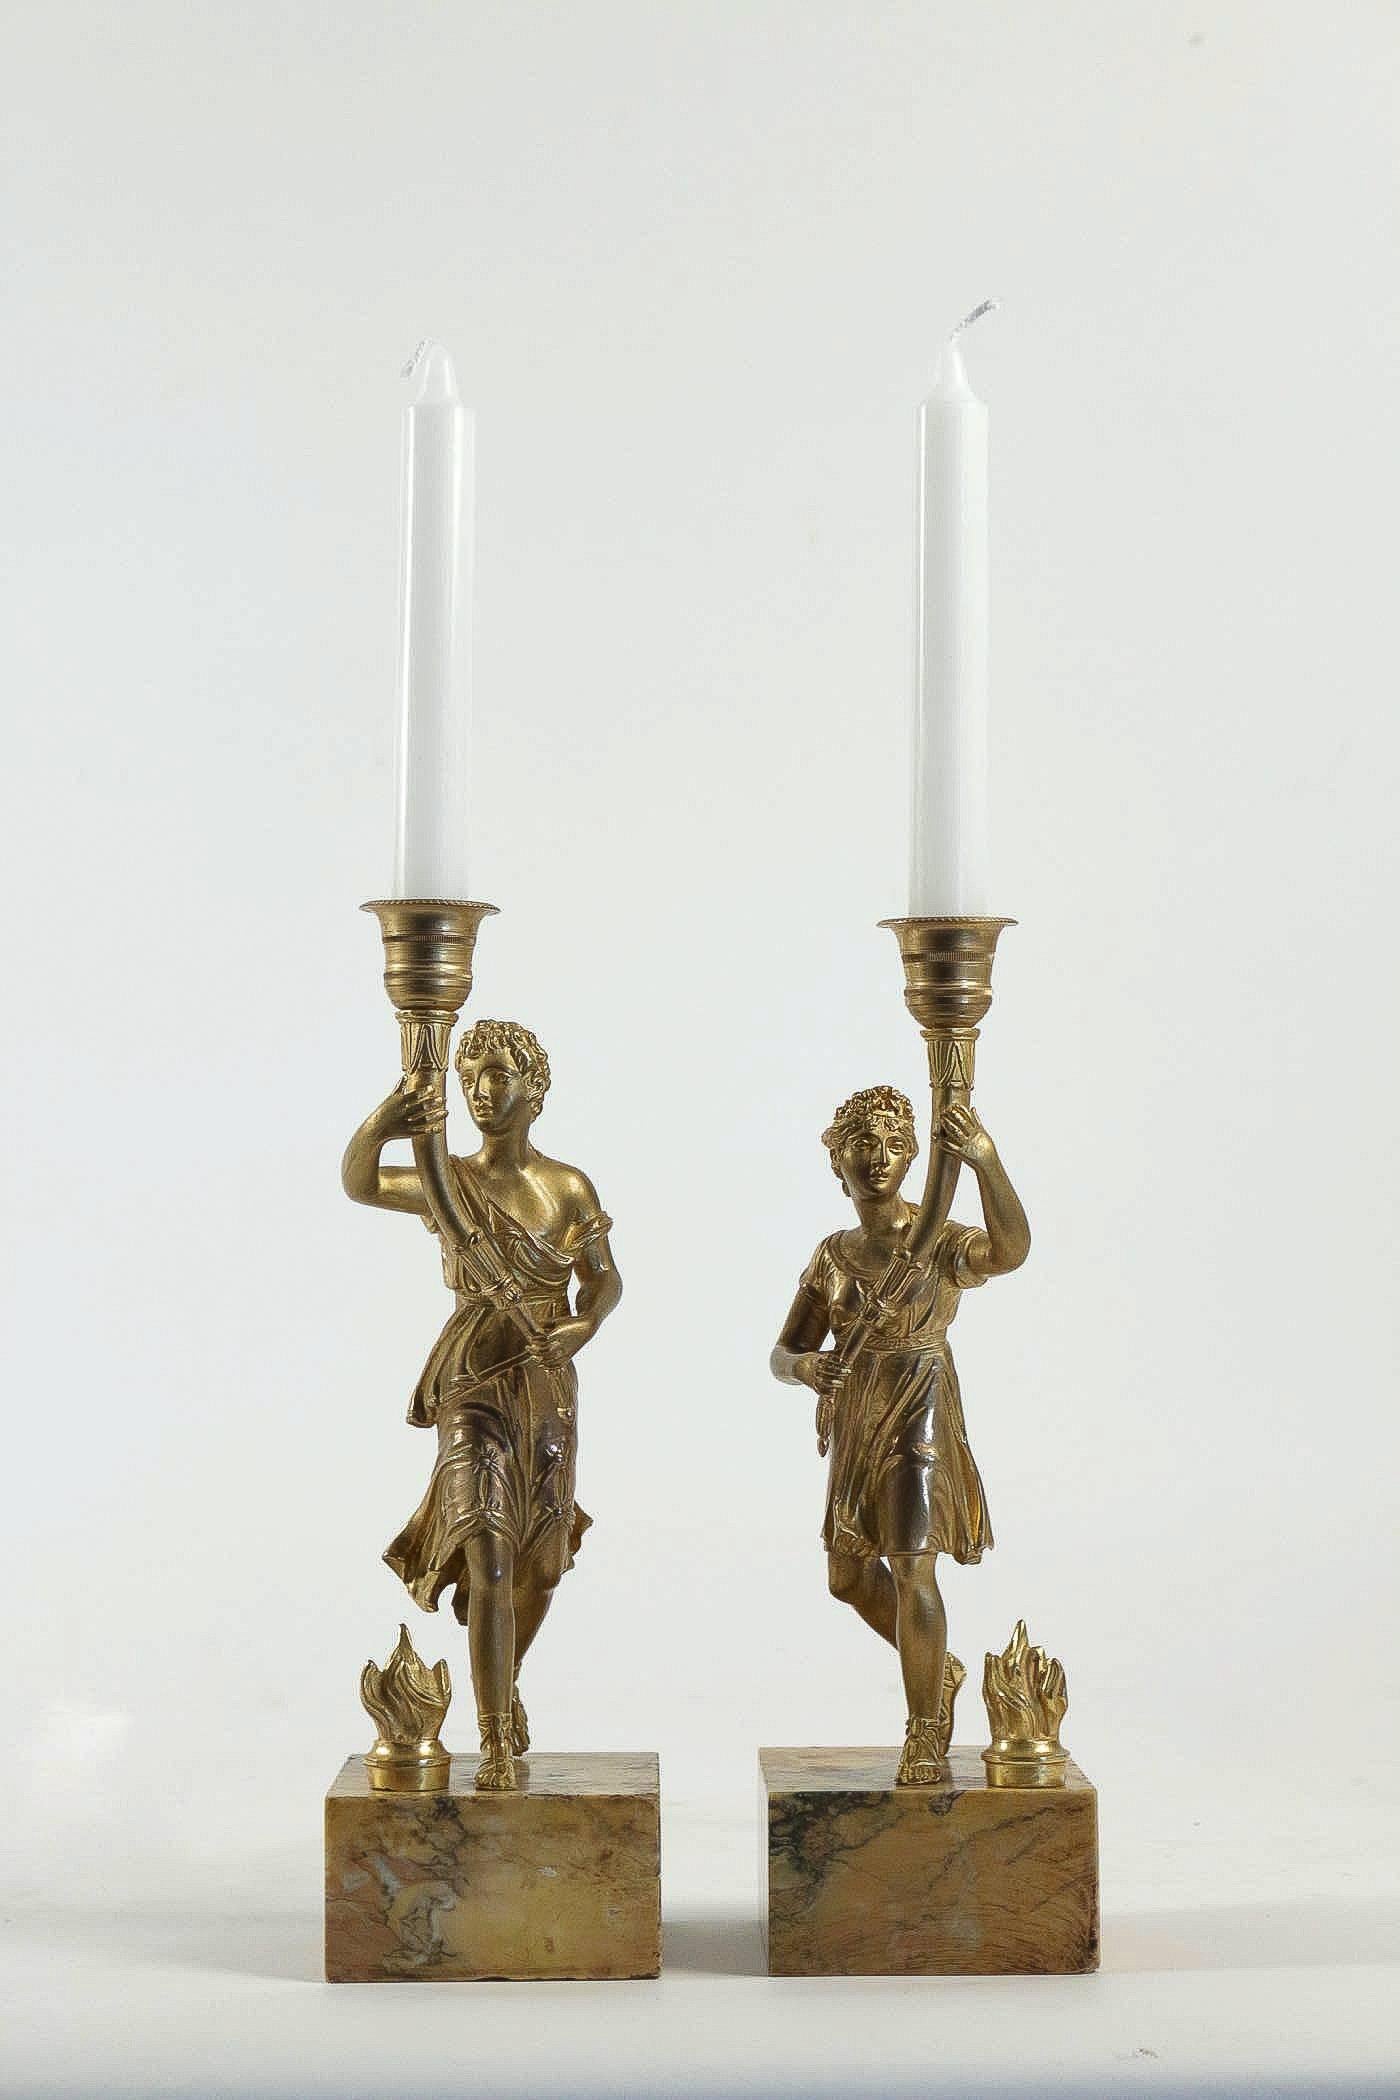 A lovely and elegant pair of candlesticks, depicting a couple antique characters in gilt bronze finely chiseled. Our candlesticks raised on Sienne marble bases.

Excellent and ornamental pair of candlesticks, circa 1850.

Dimensions: H 12.59 in.